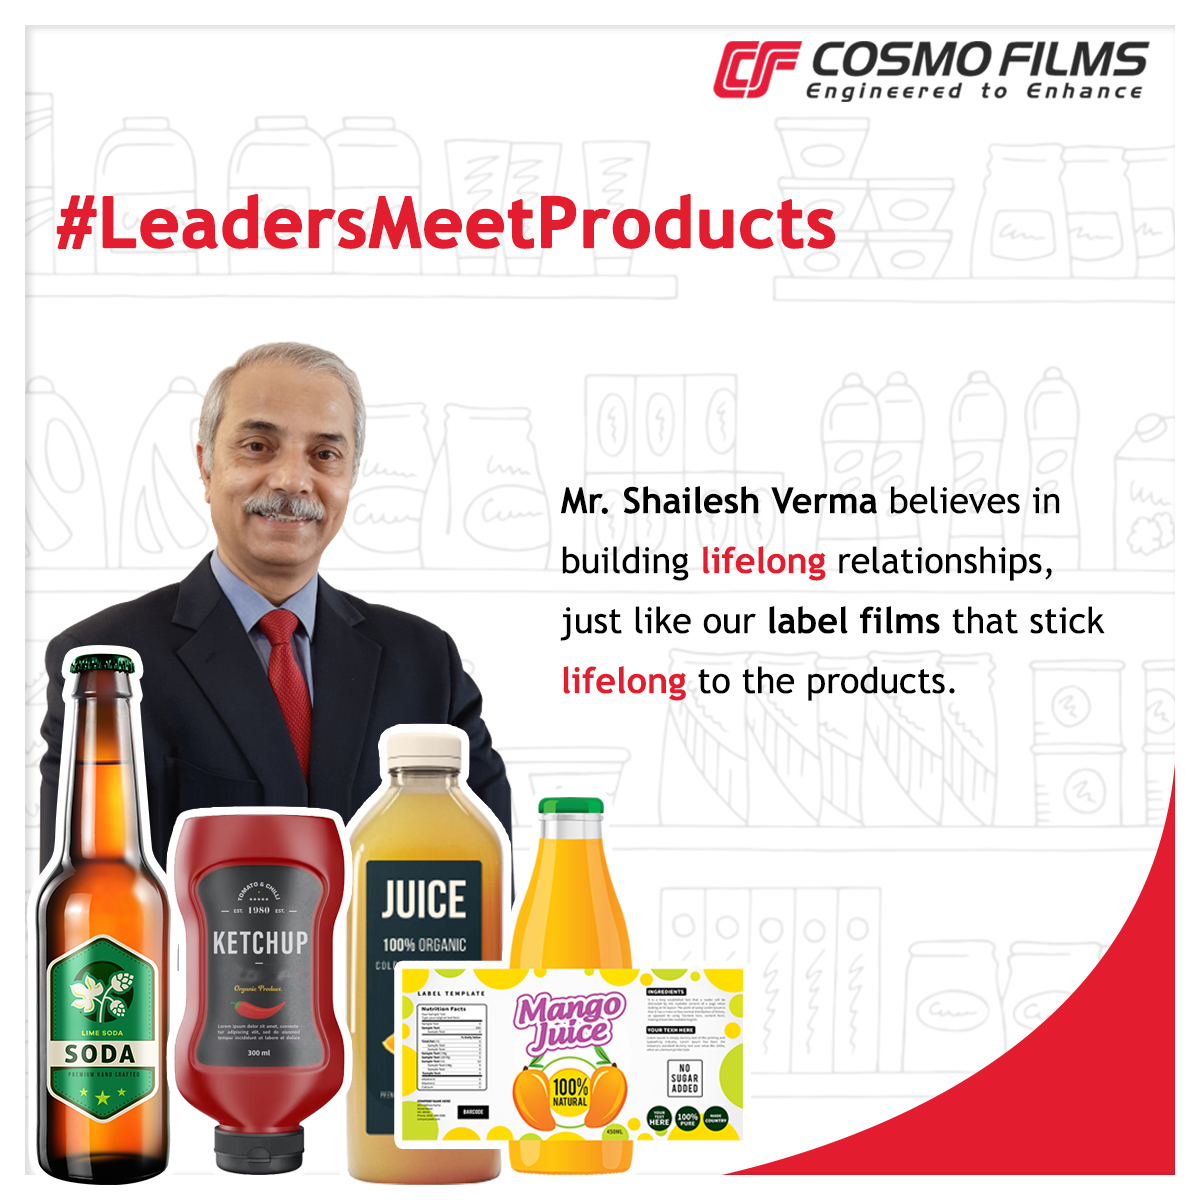 Mr. Shailesh Verma, Vice President & Global Sales Head of Cosmo Films, believes in building and maintaining lifelong relationships. Our films aim to replicate that lifelong bond, sticking to products through it all.

#CosmoFilms #LeadersMeetProducts #LabelFilms #LabelIndustry